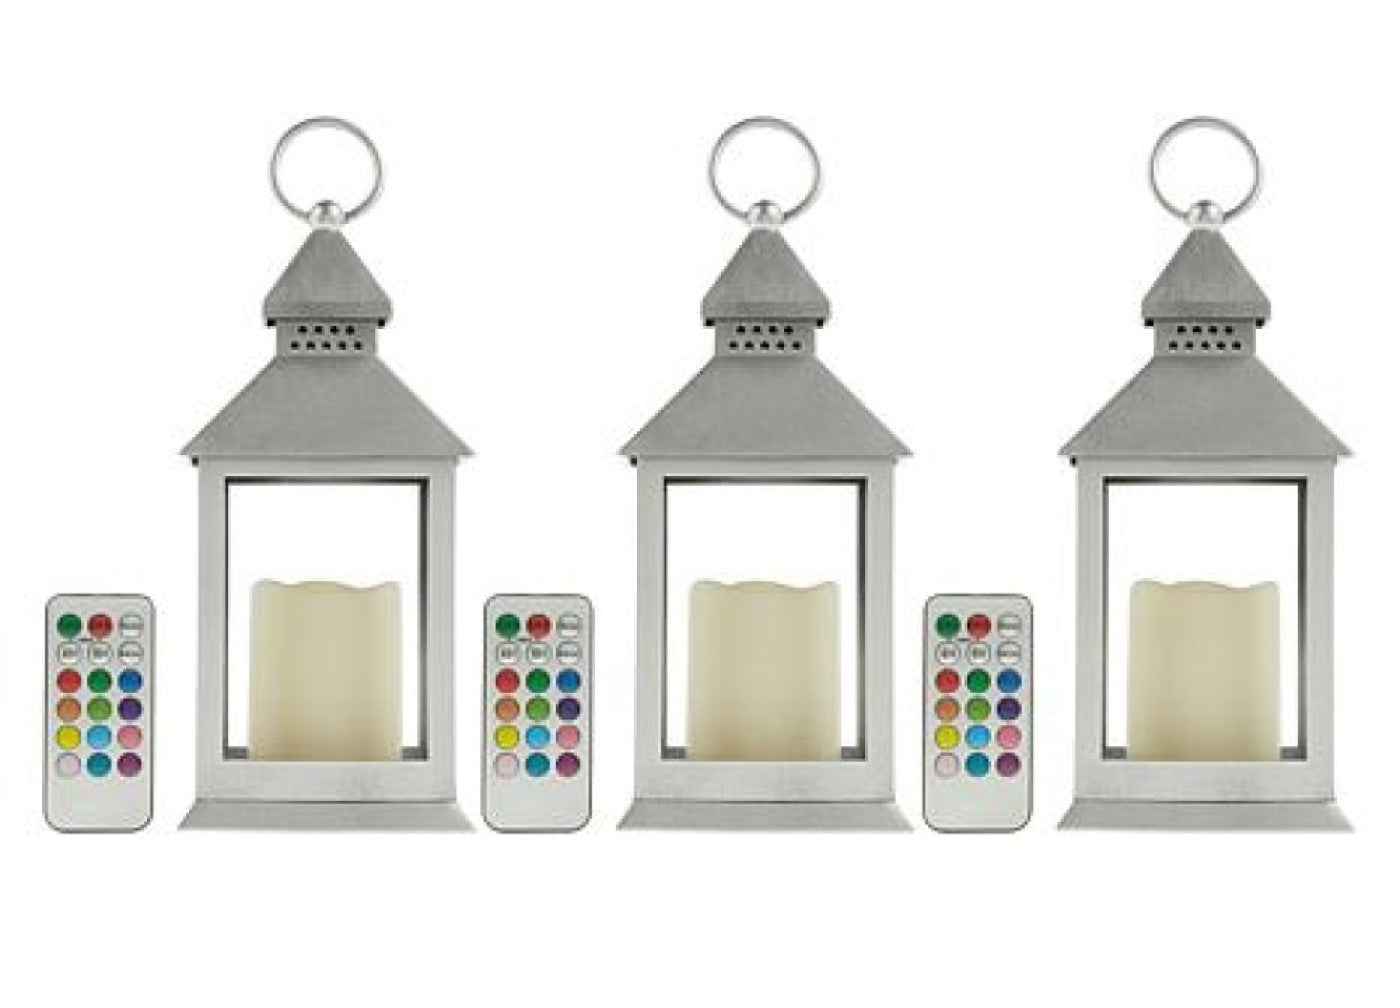 Color Changing Lanterns with Remote Control- Set of 3